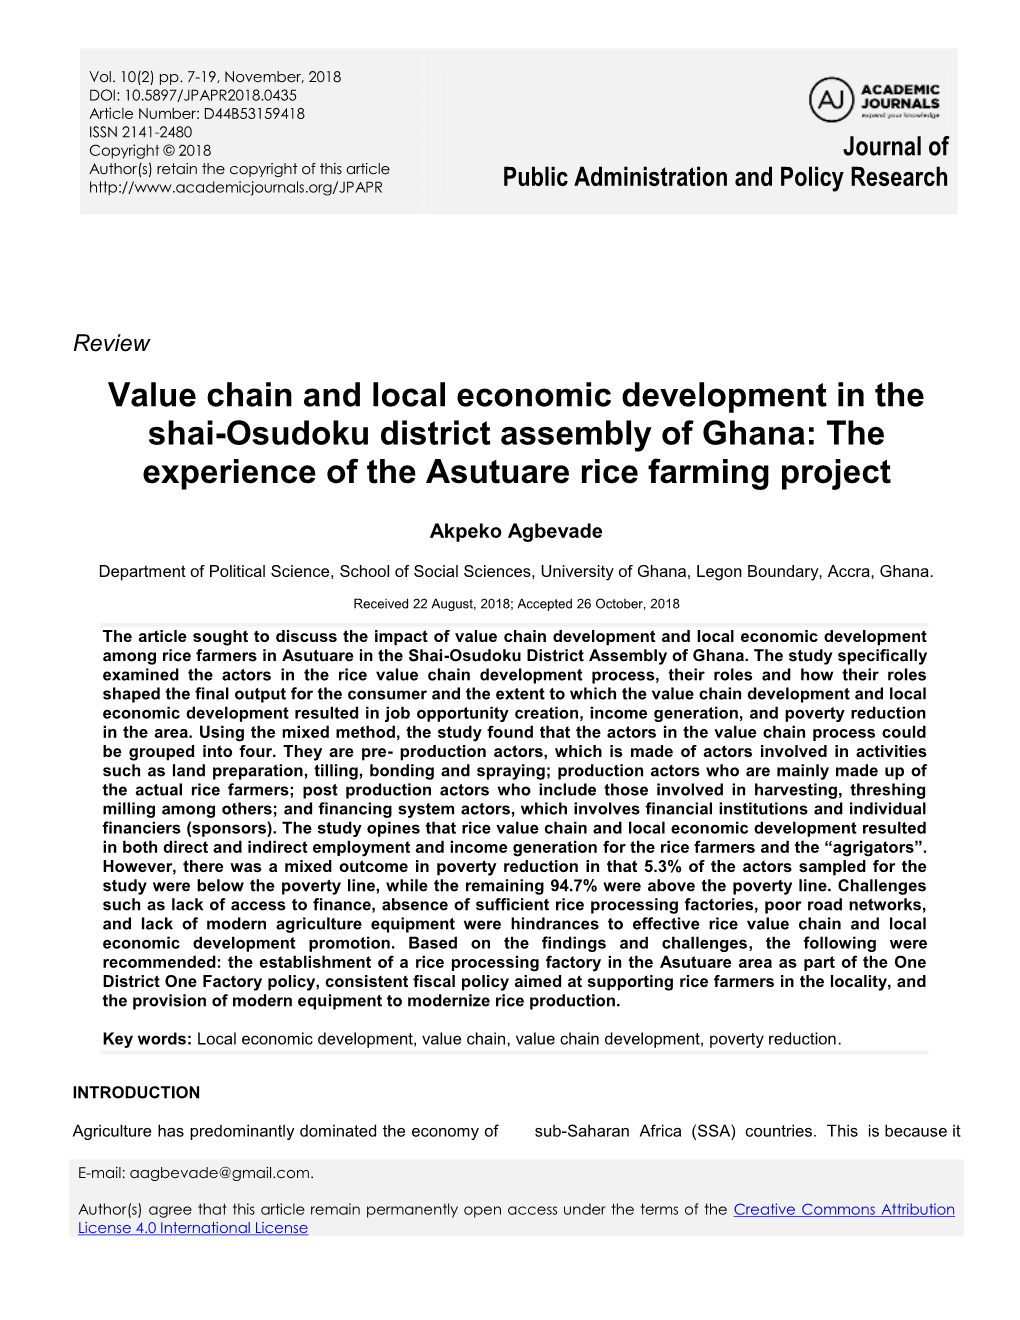 Value Chain and Local Economic Development in the Shai-Osudoku District Assembly of Ghana: the Experience of the Asutuare Rice Farming Project